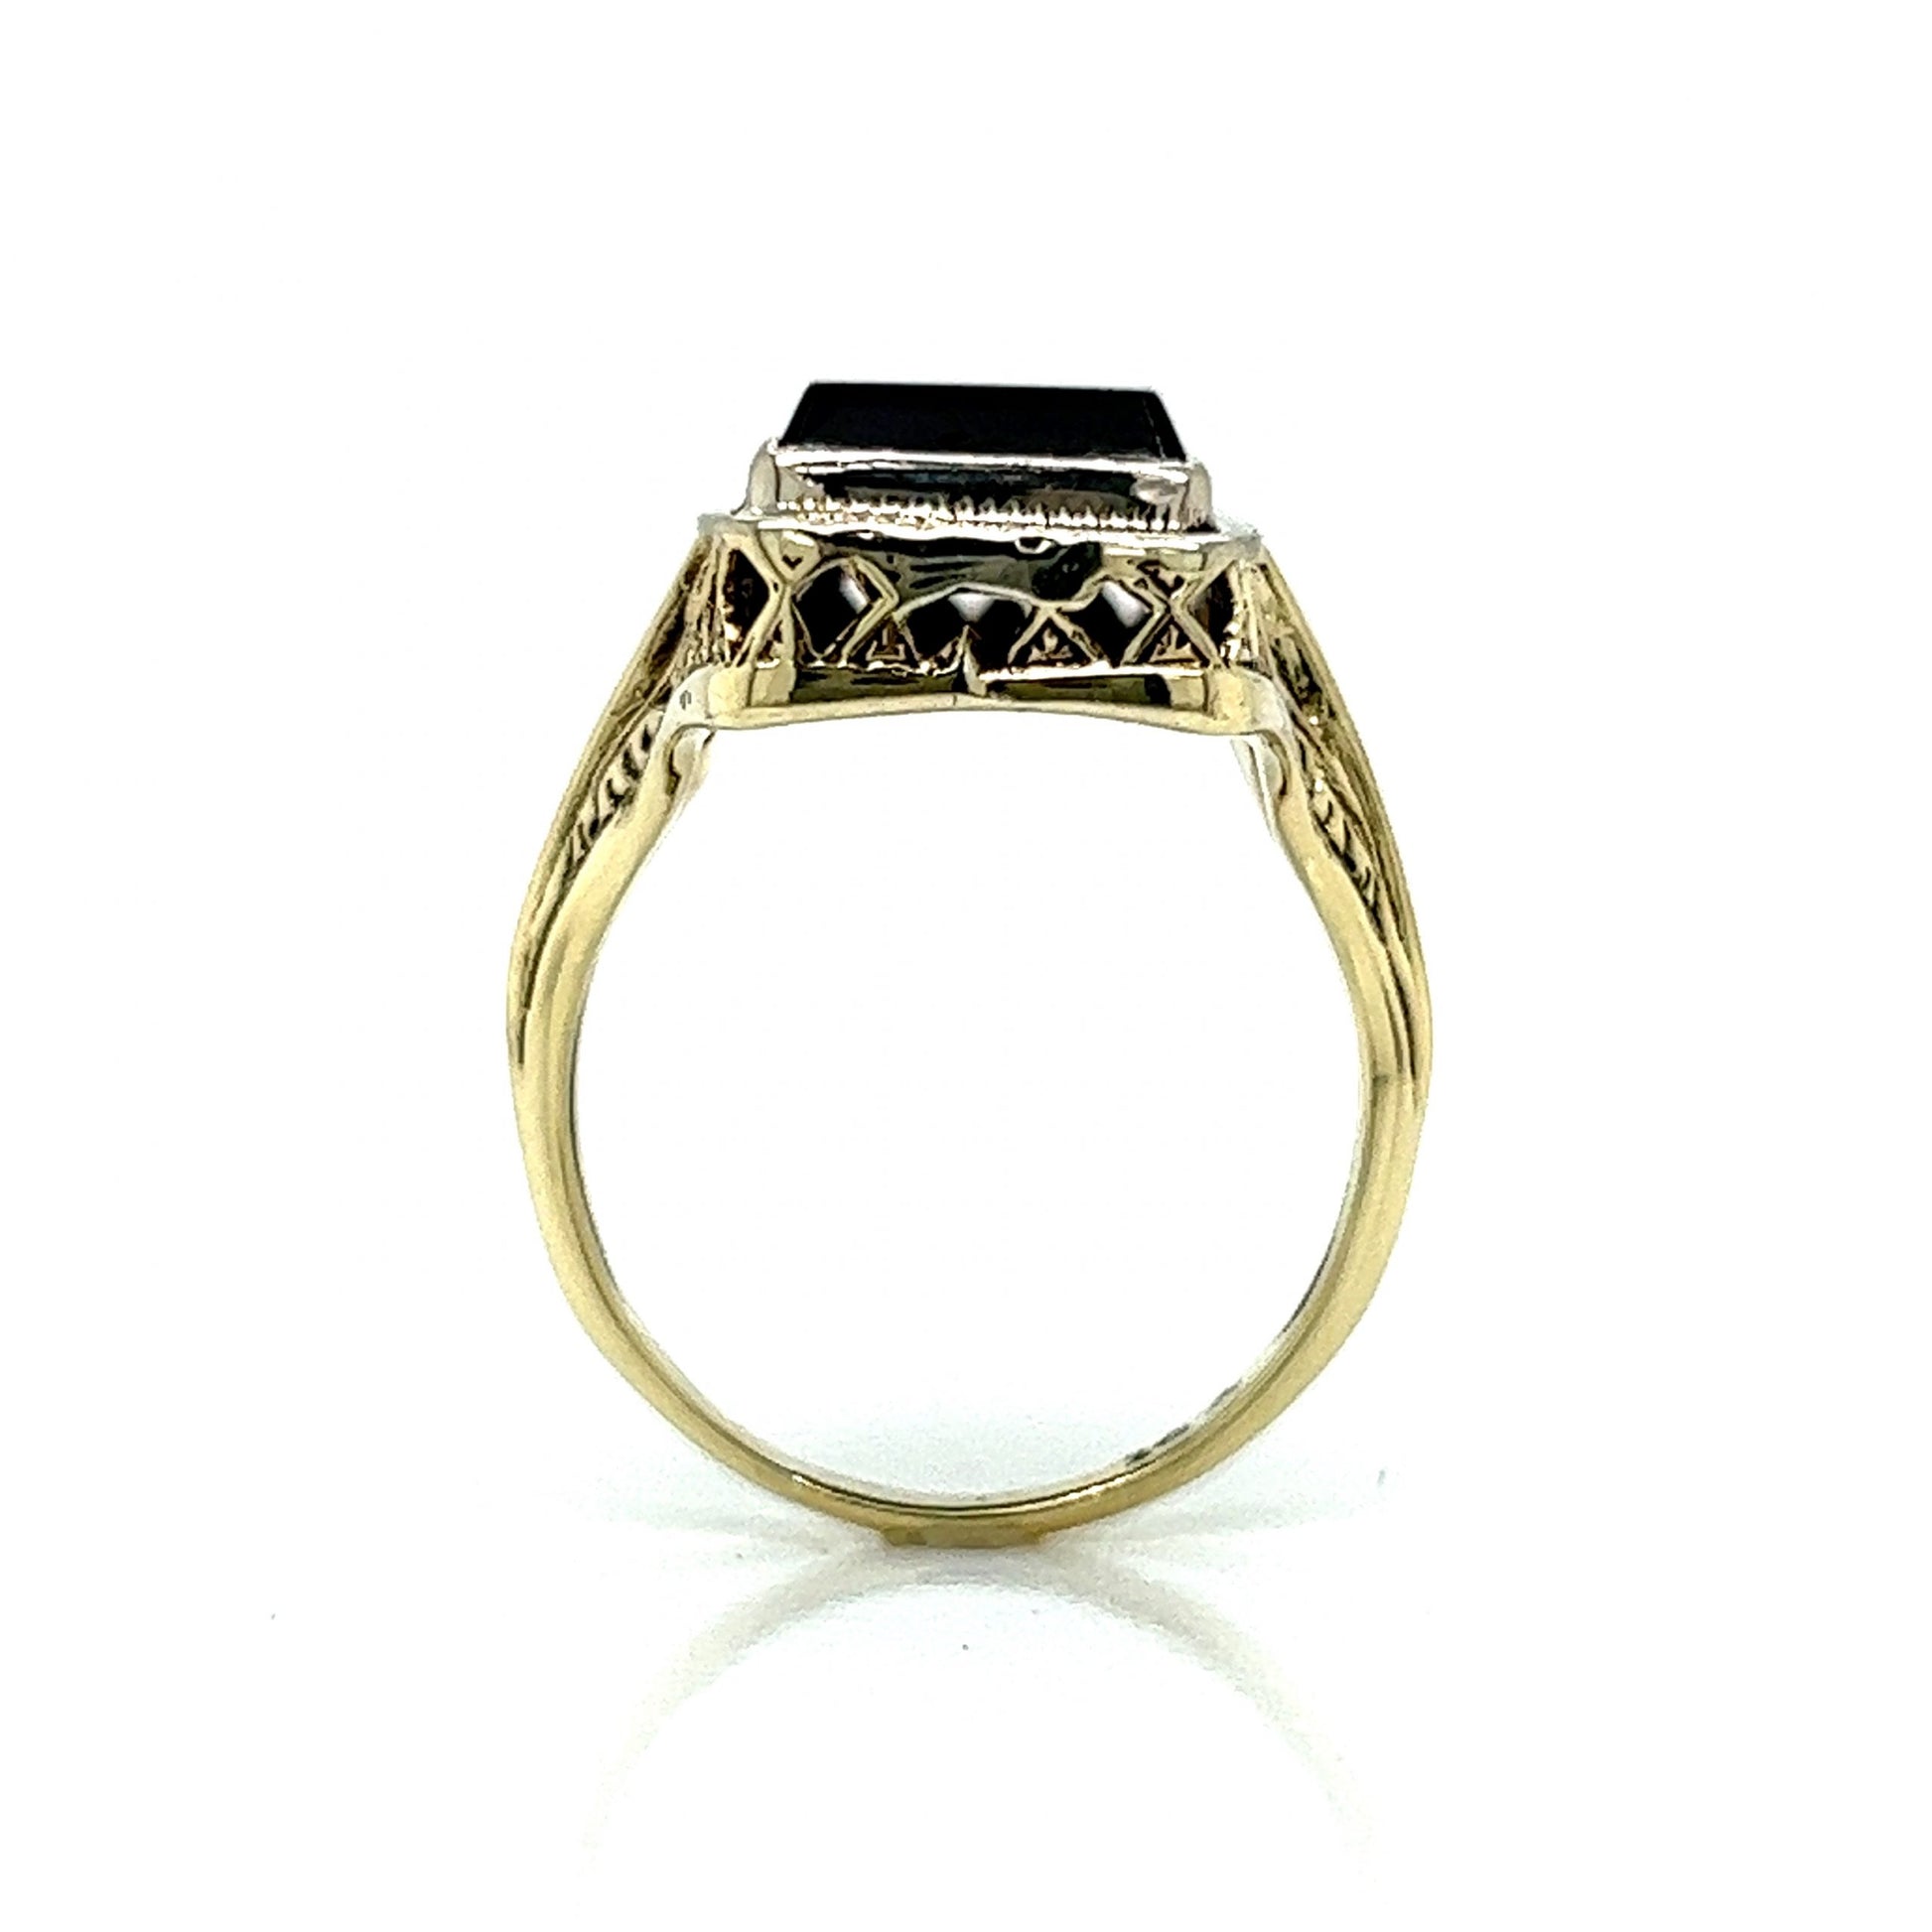 Late Art Deco Onyx Ring in 14k White & Yellow Gold